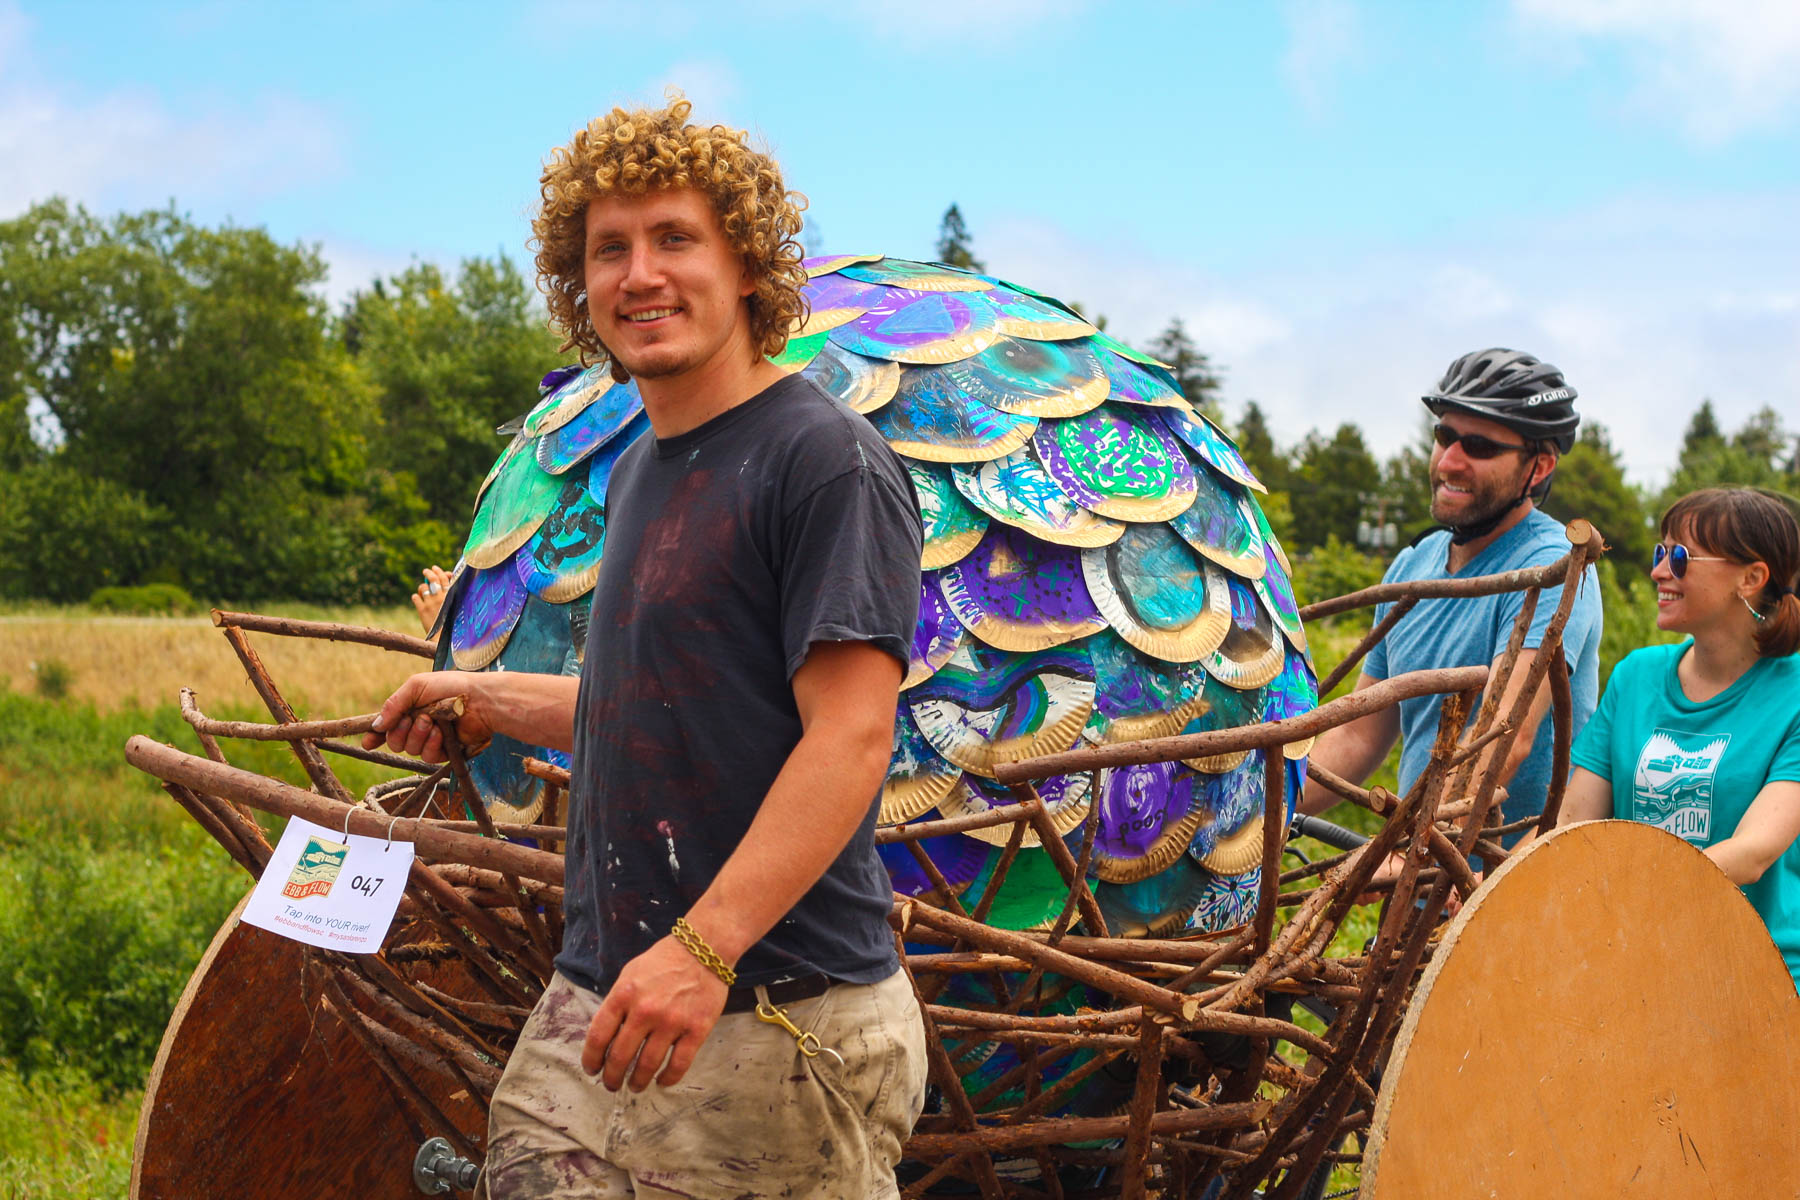 Luke Wilson and his two-wheeled, self-righting "Dragon Egg" nest